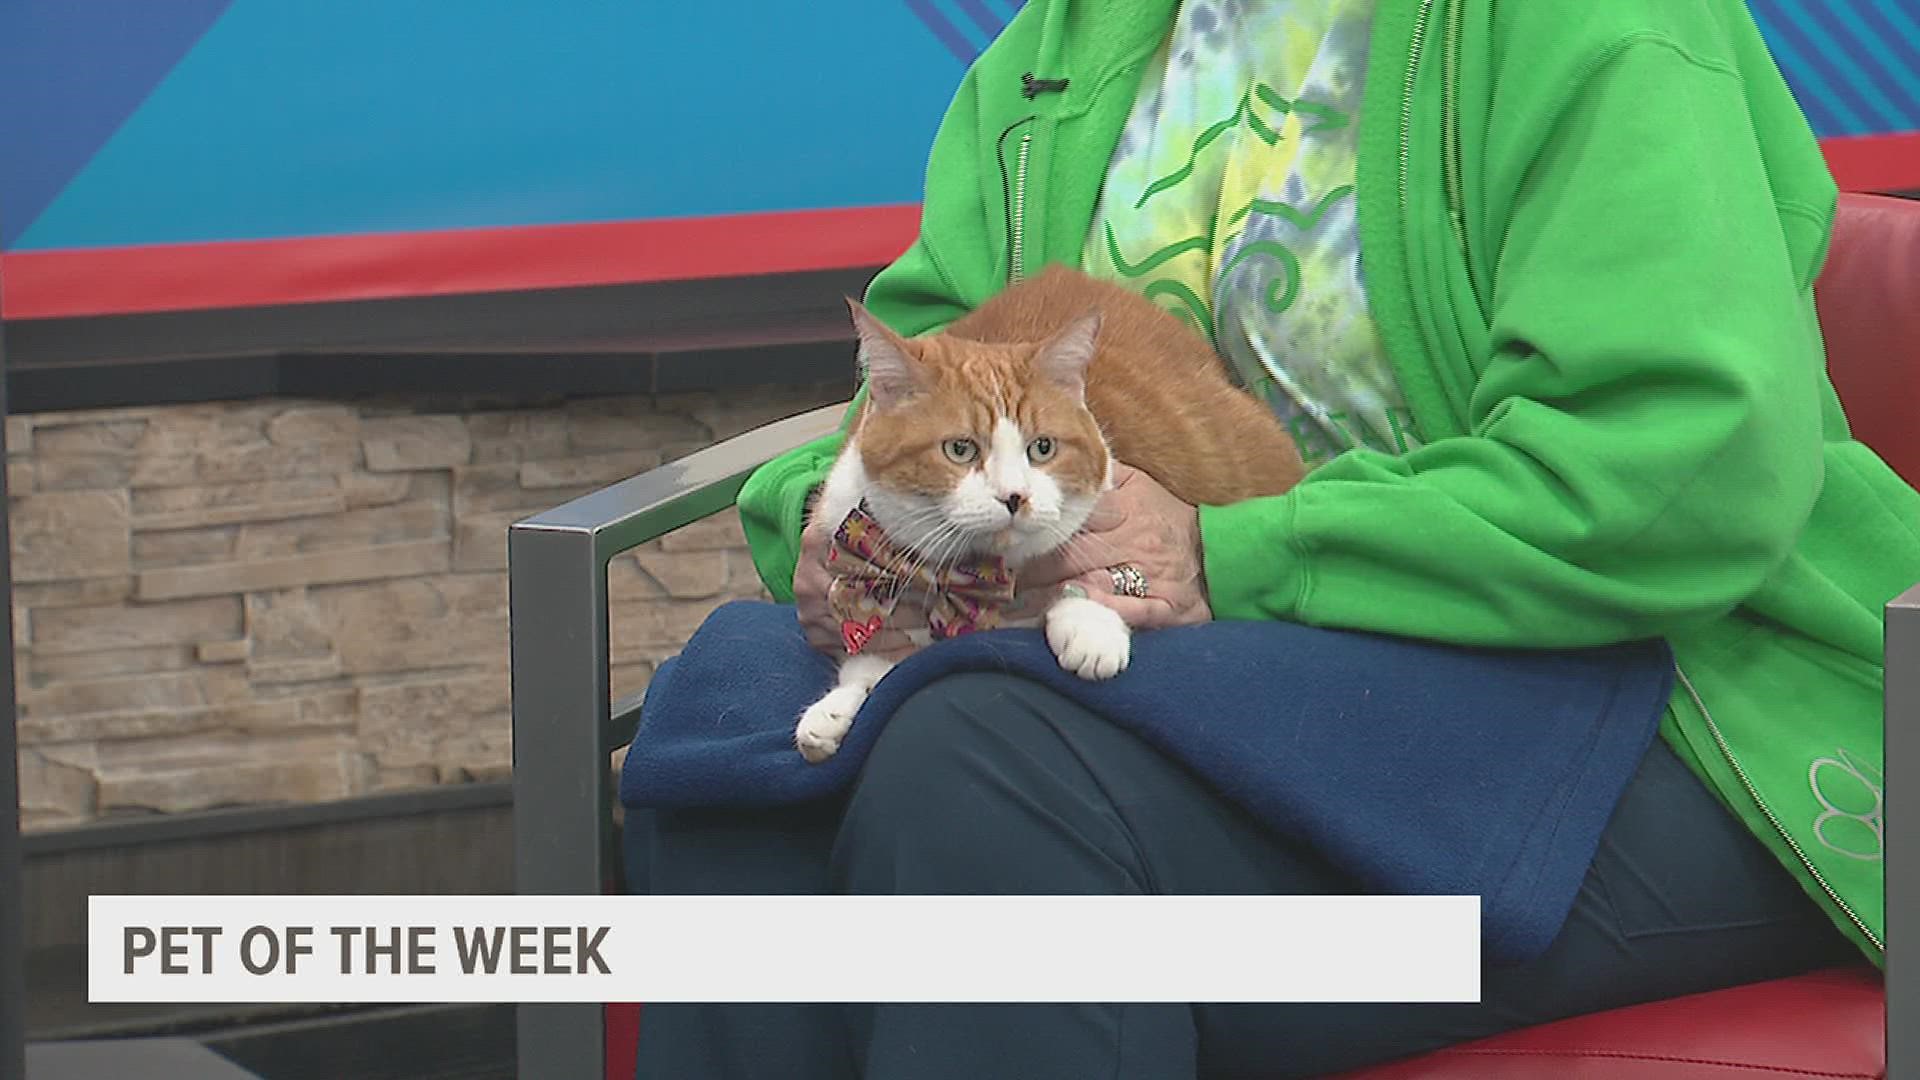 Patti Mcrae with the Quad City Animal Welfare Center joins us with Billy, our pet of the week! Find out how you can help the Quad City Animal Welfare Center.